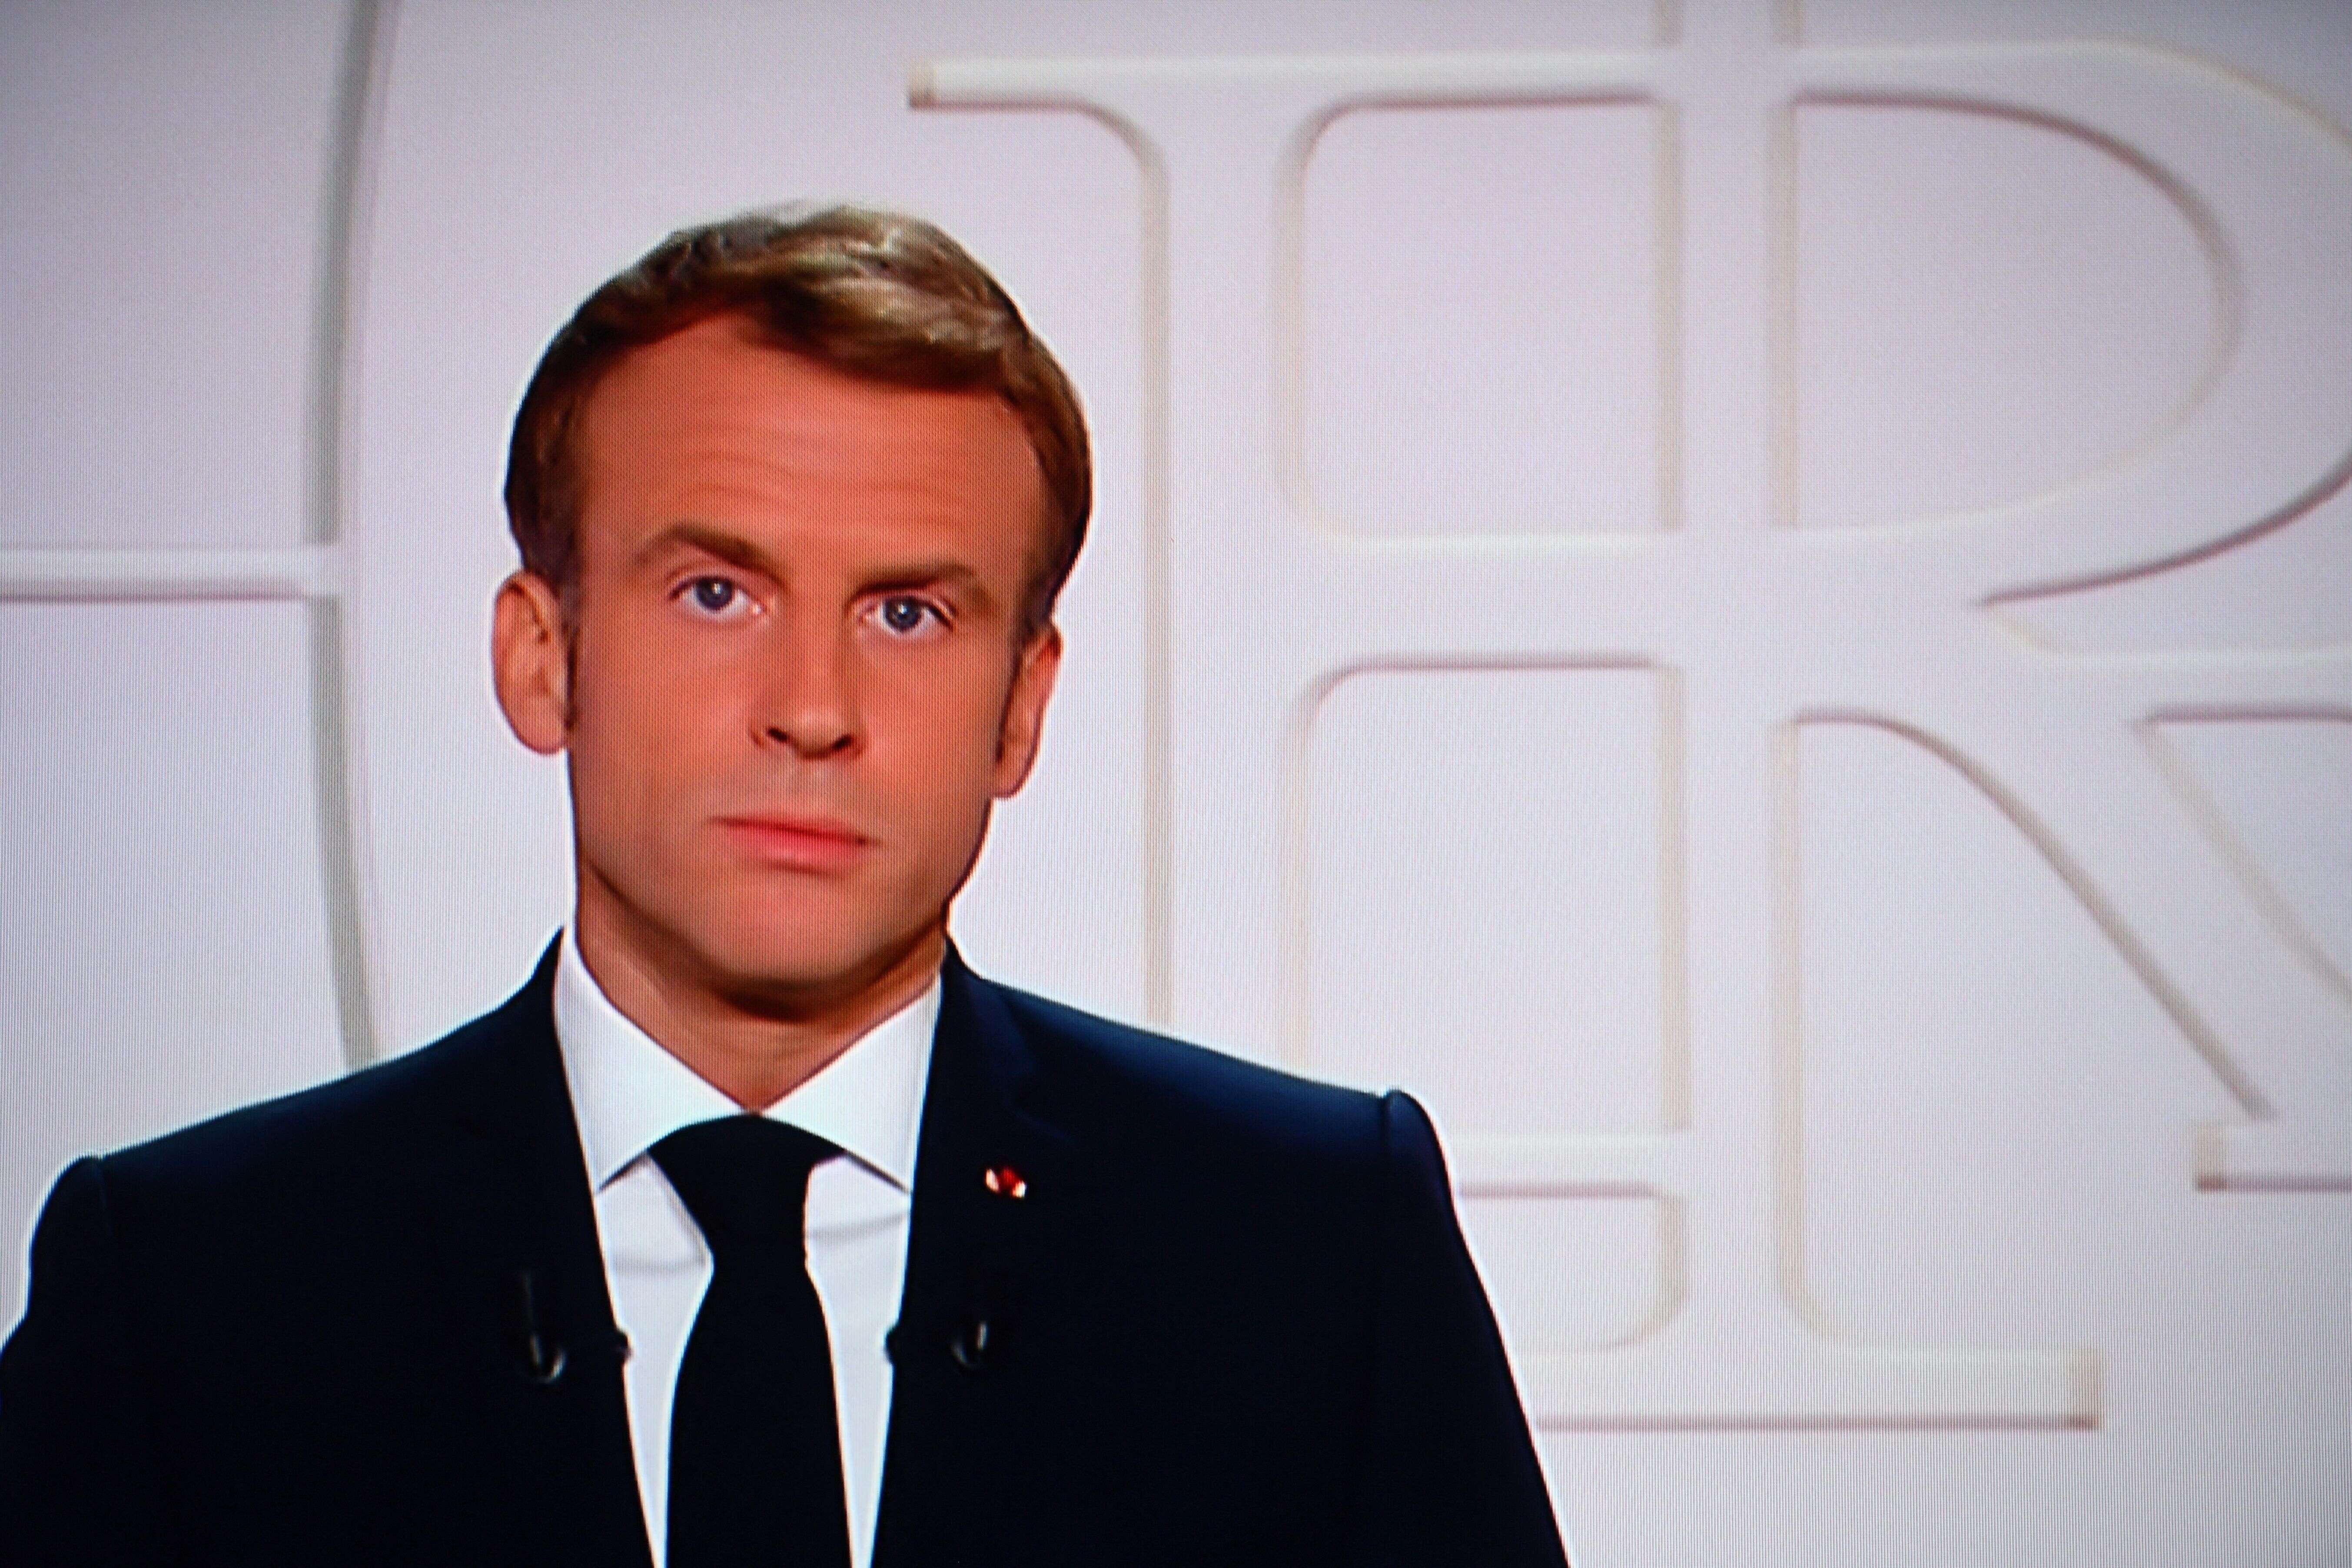 France's President Emmanuel Macron appears on a TV screen as he addresses to the nation on Covid-19 and reforms in Paris on November 9, 2021. - For the ninth time since the beginning of the Covid-19 crisis, Emmanuel Macron solemnly addresses the French to boost the vaccine recall in the face of the rebound of the epidemic, to boast of his record and to evoke the priorities of the end of the five-year term. (Photo by Christophe ARCHAMBAULT / AFP) (Photo by CHRISTOPHE ARCHAMBAULT/AFP via Getty Images)